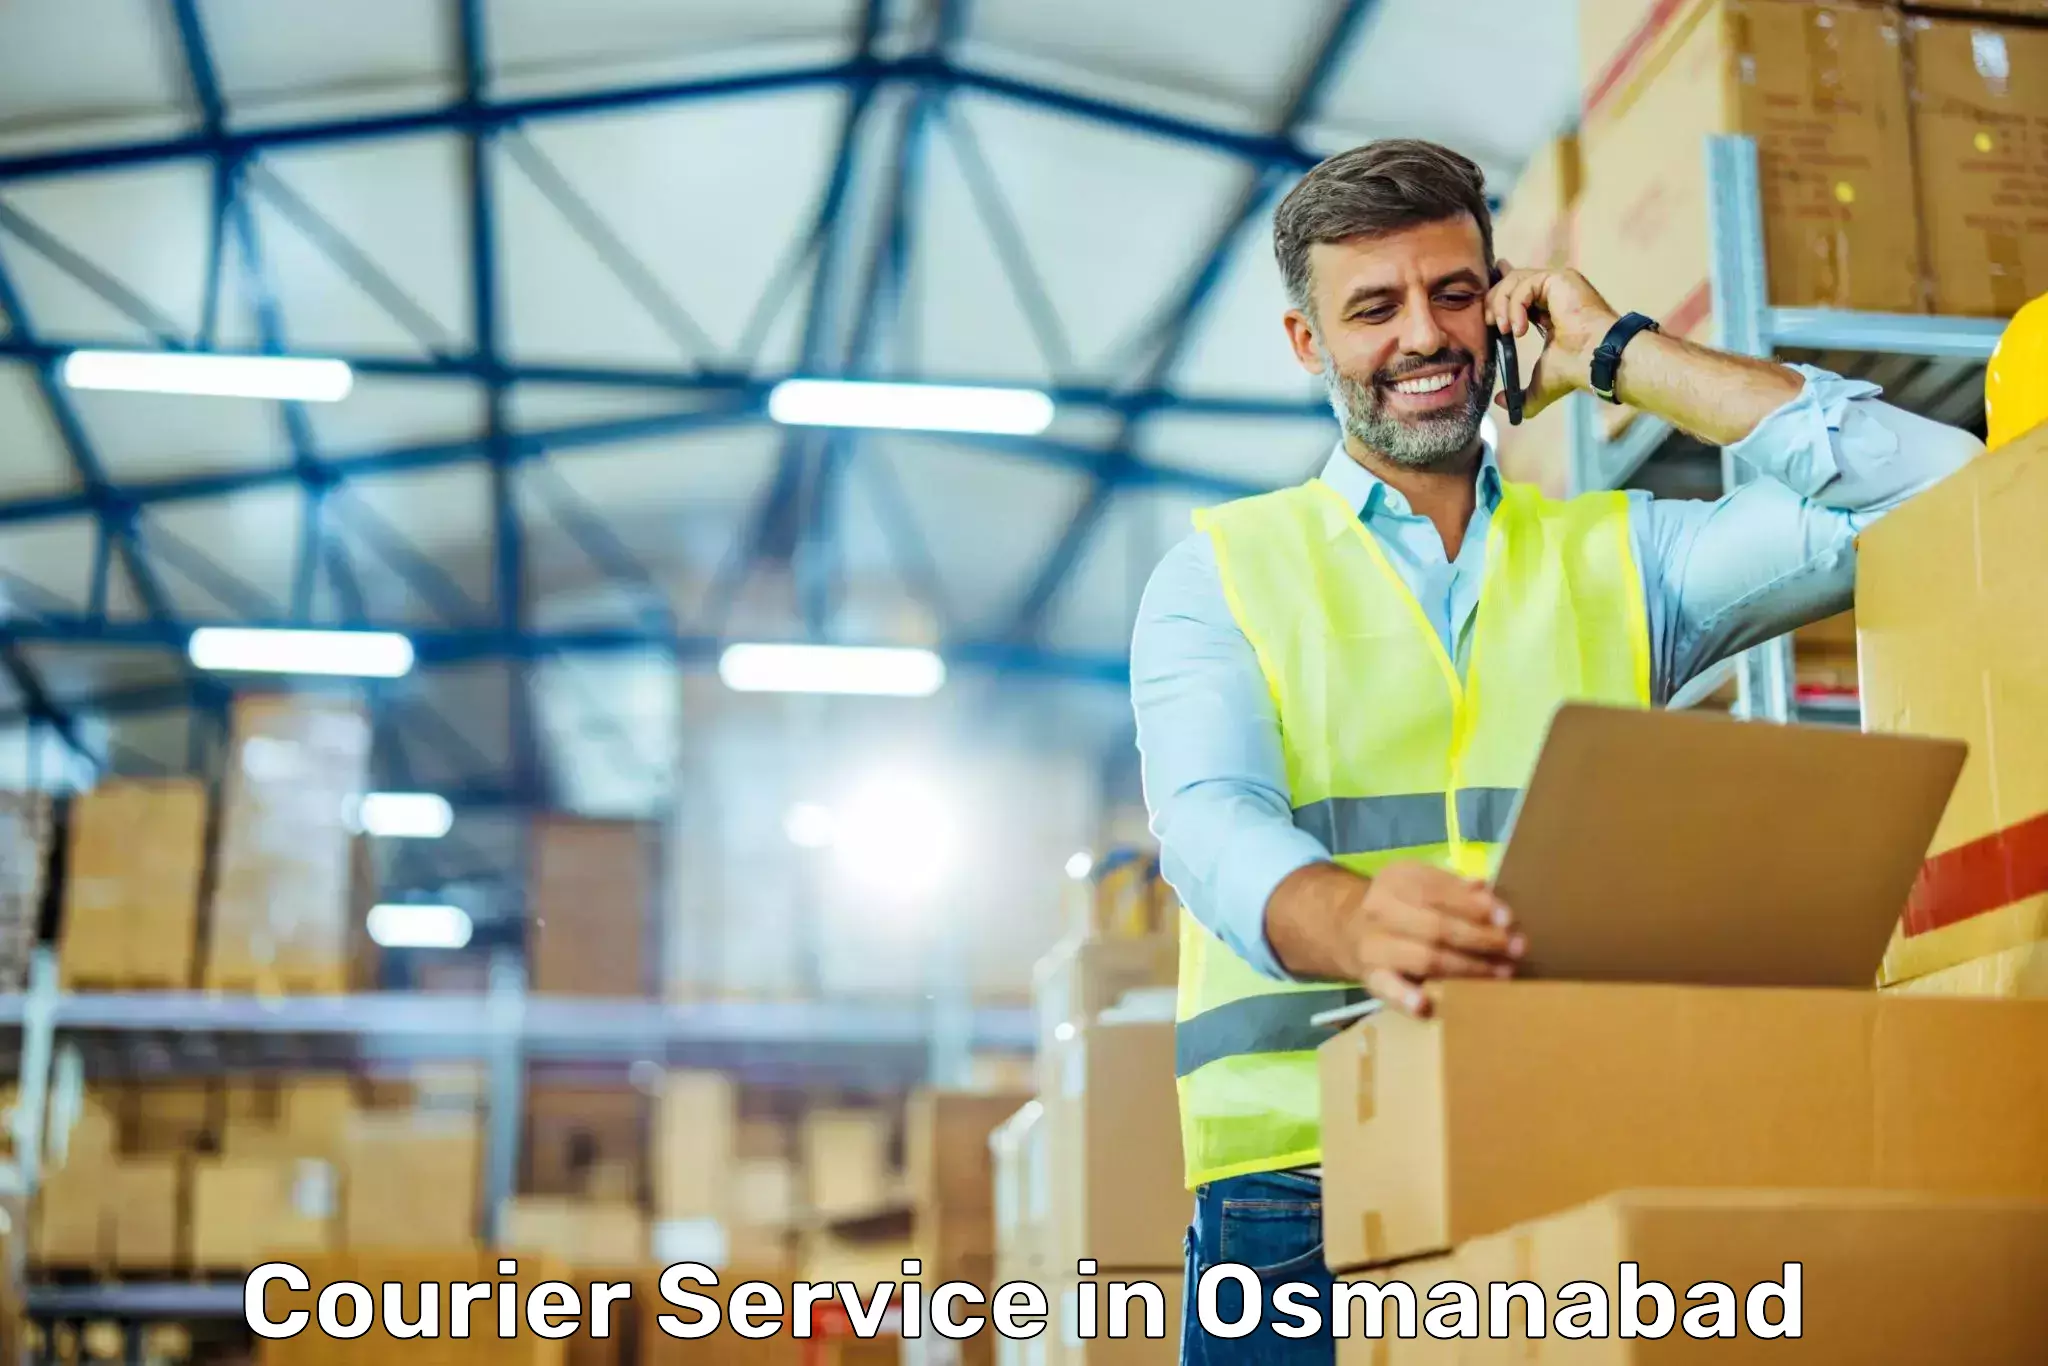 Sustainable shipping practices in Osmanabad